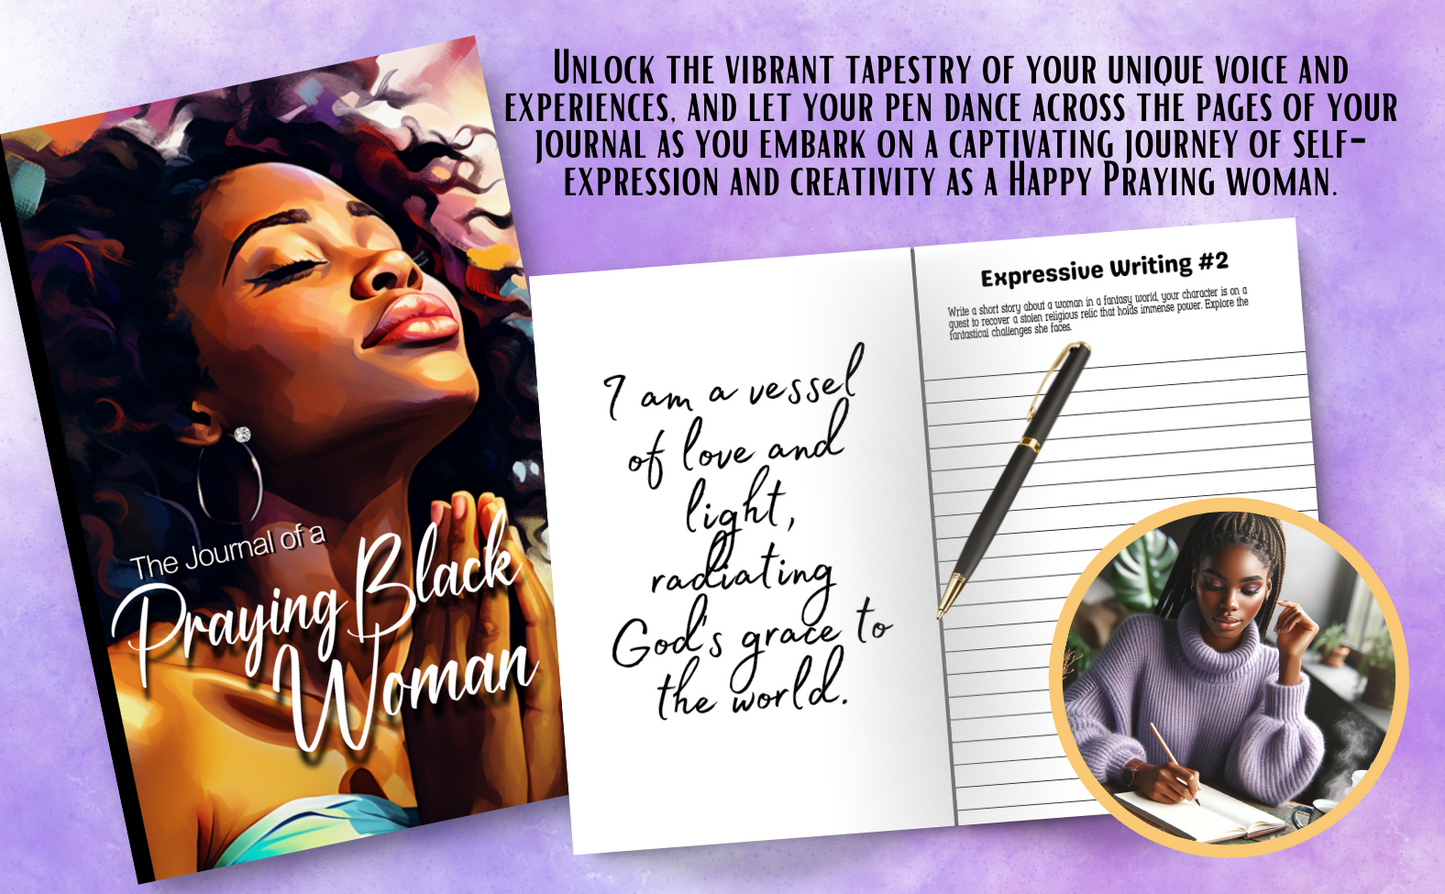 The Journal of a Praying Black Woman: A Guided Prayer Journal with Prompts for Faithful Reflections on your Devine Journey